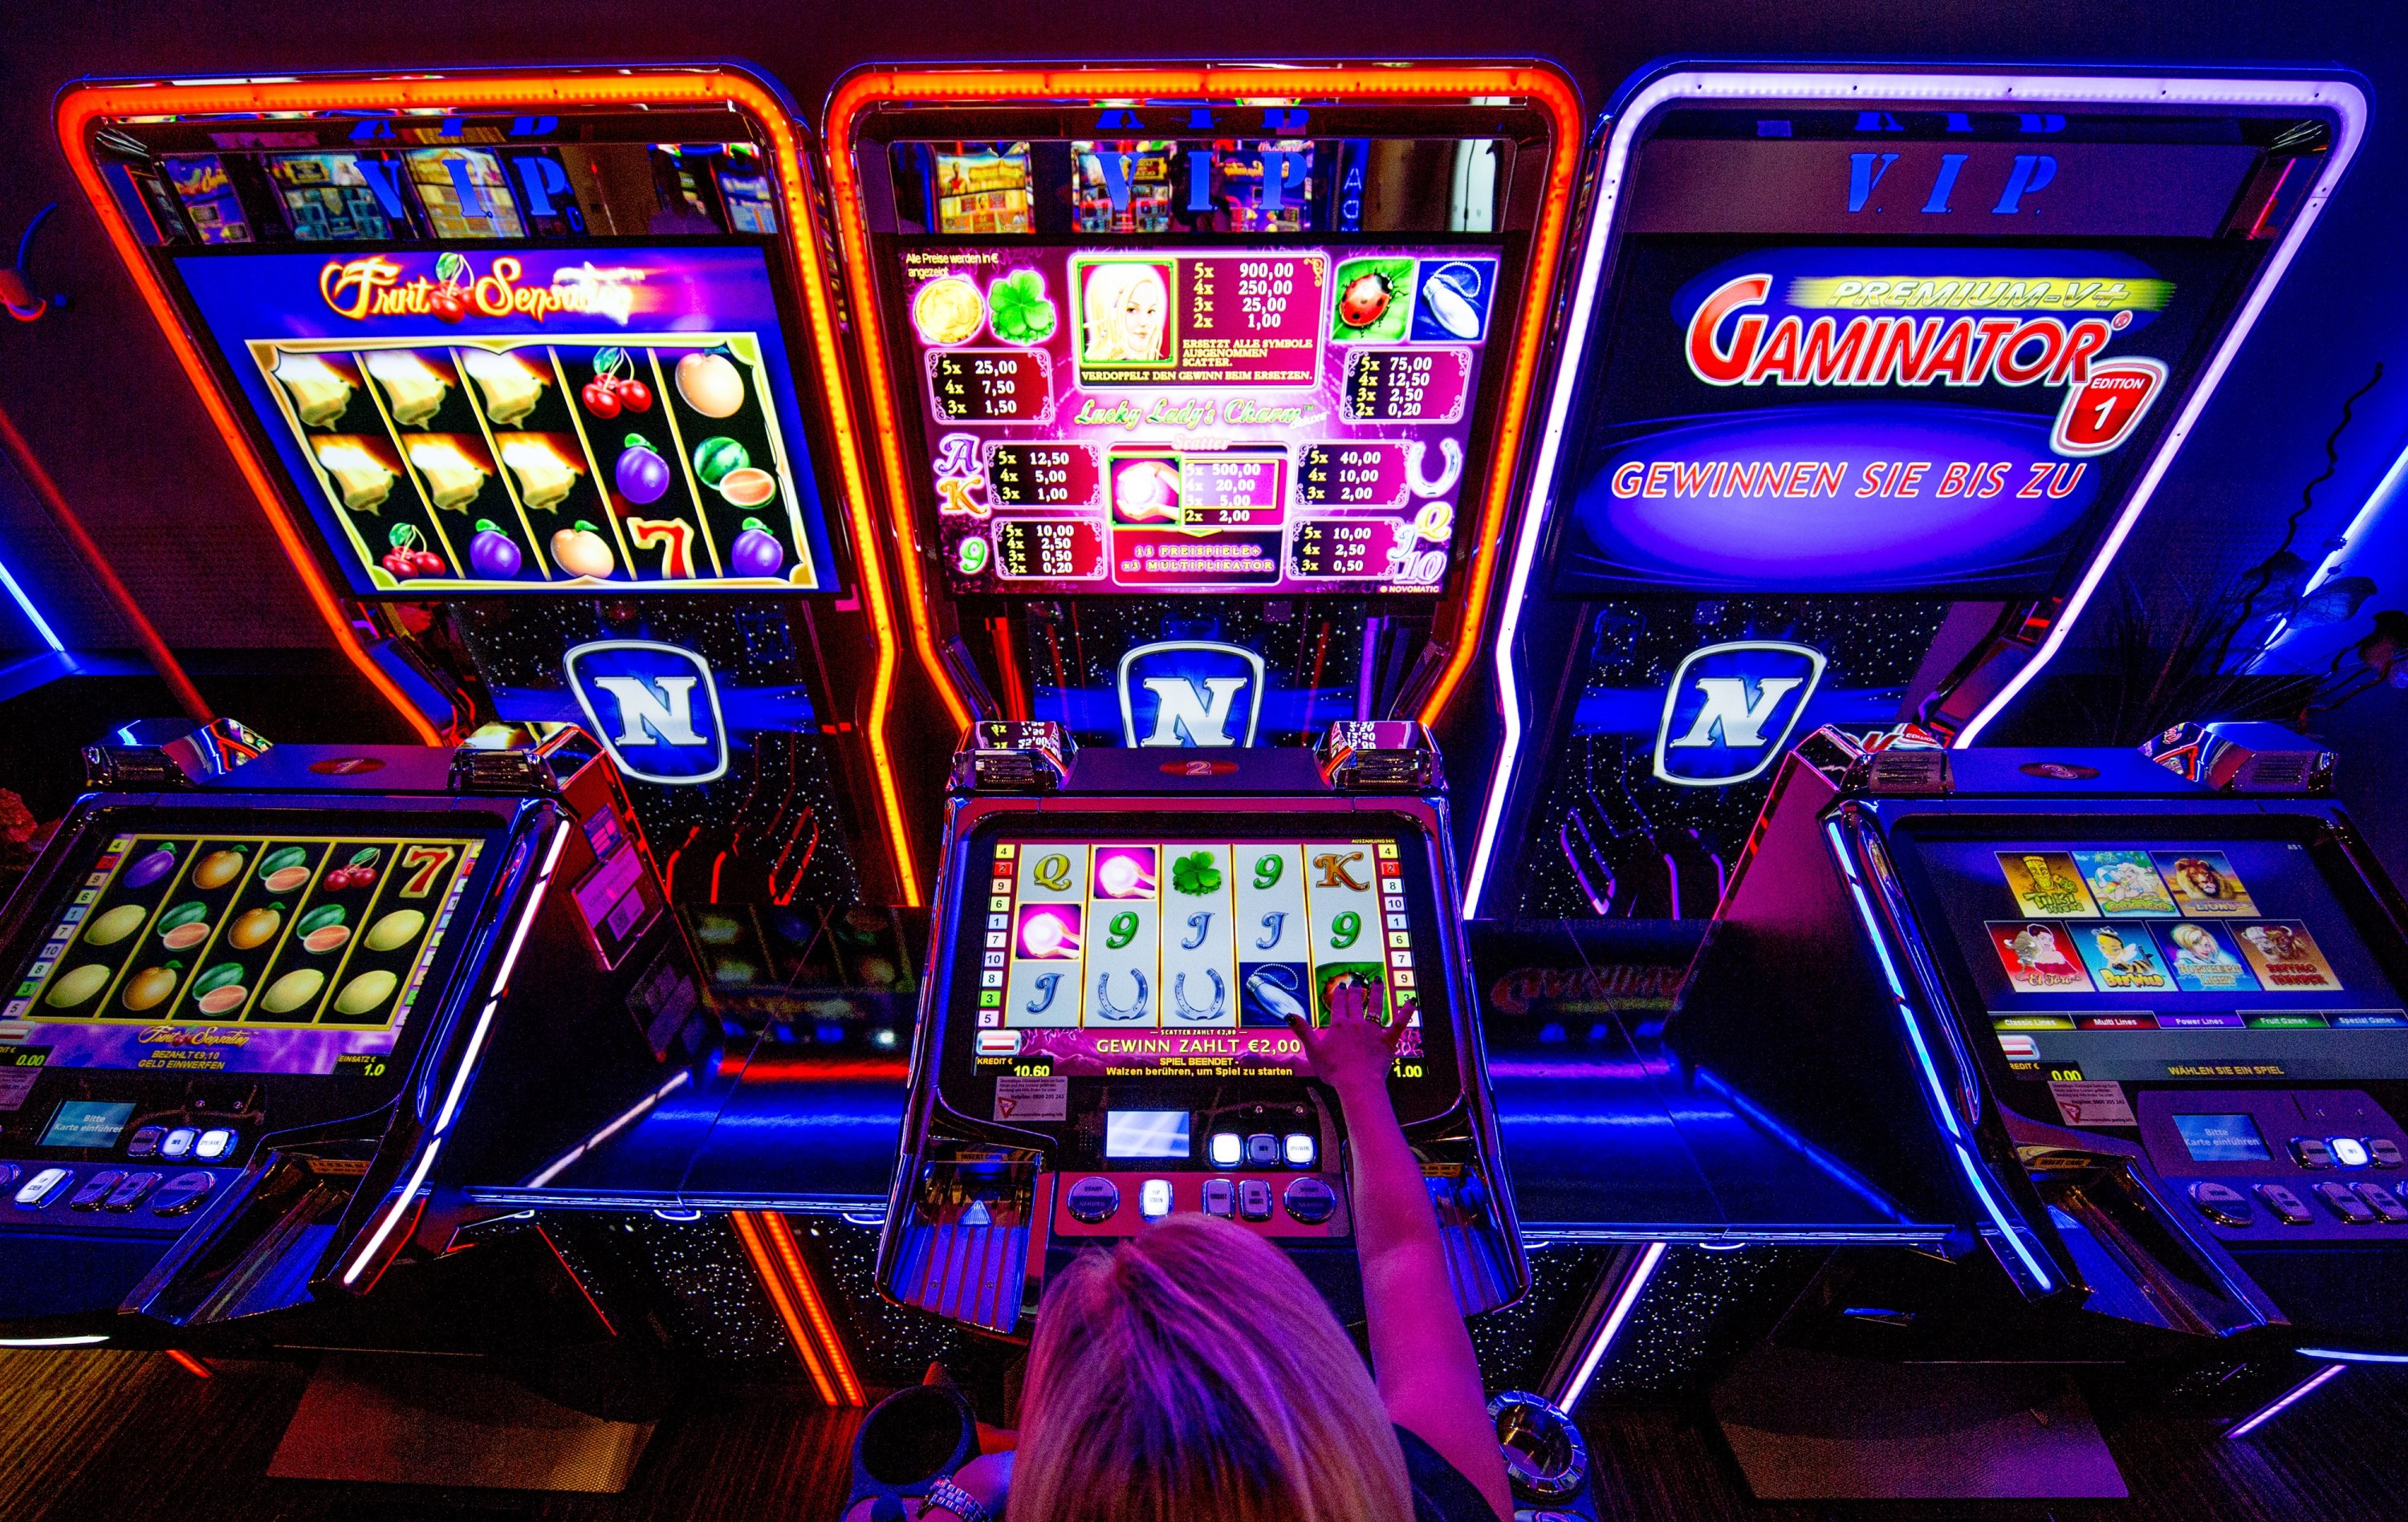 Gambling industry: Too much influence on politics? | Opinion